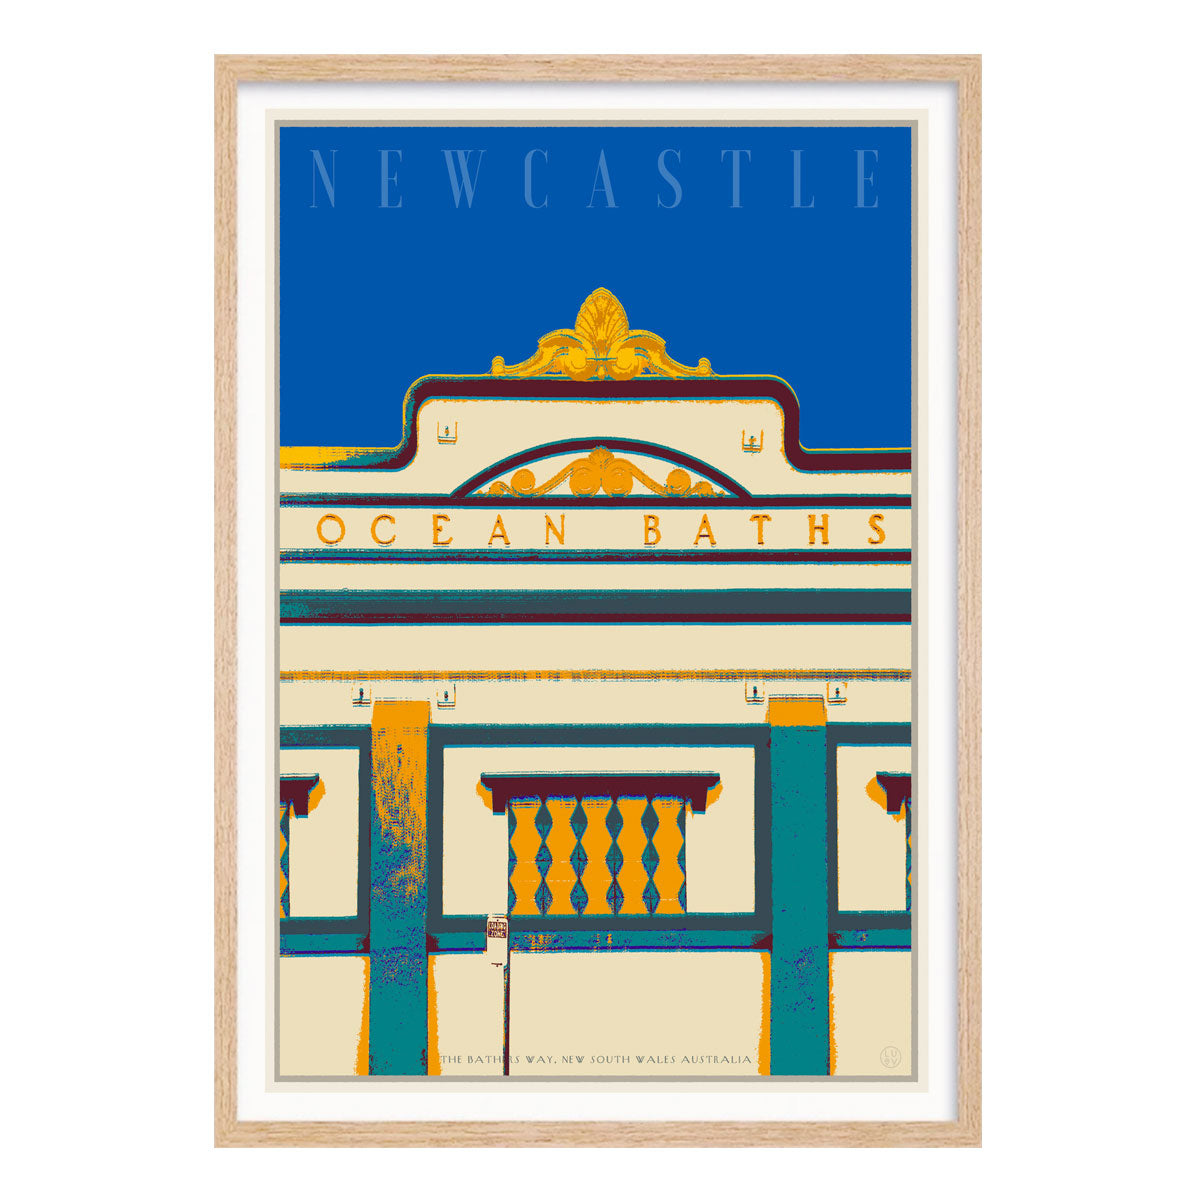 Newcastle baths deco pop travel poster print in oak frame by Places We Luv